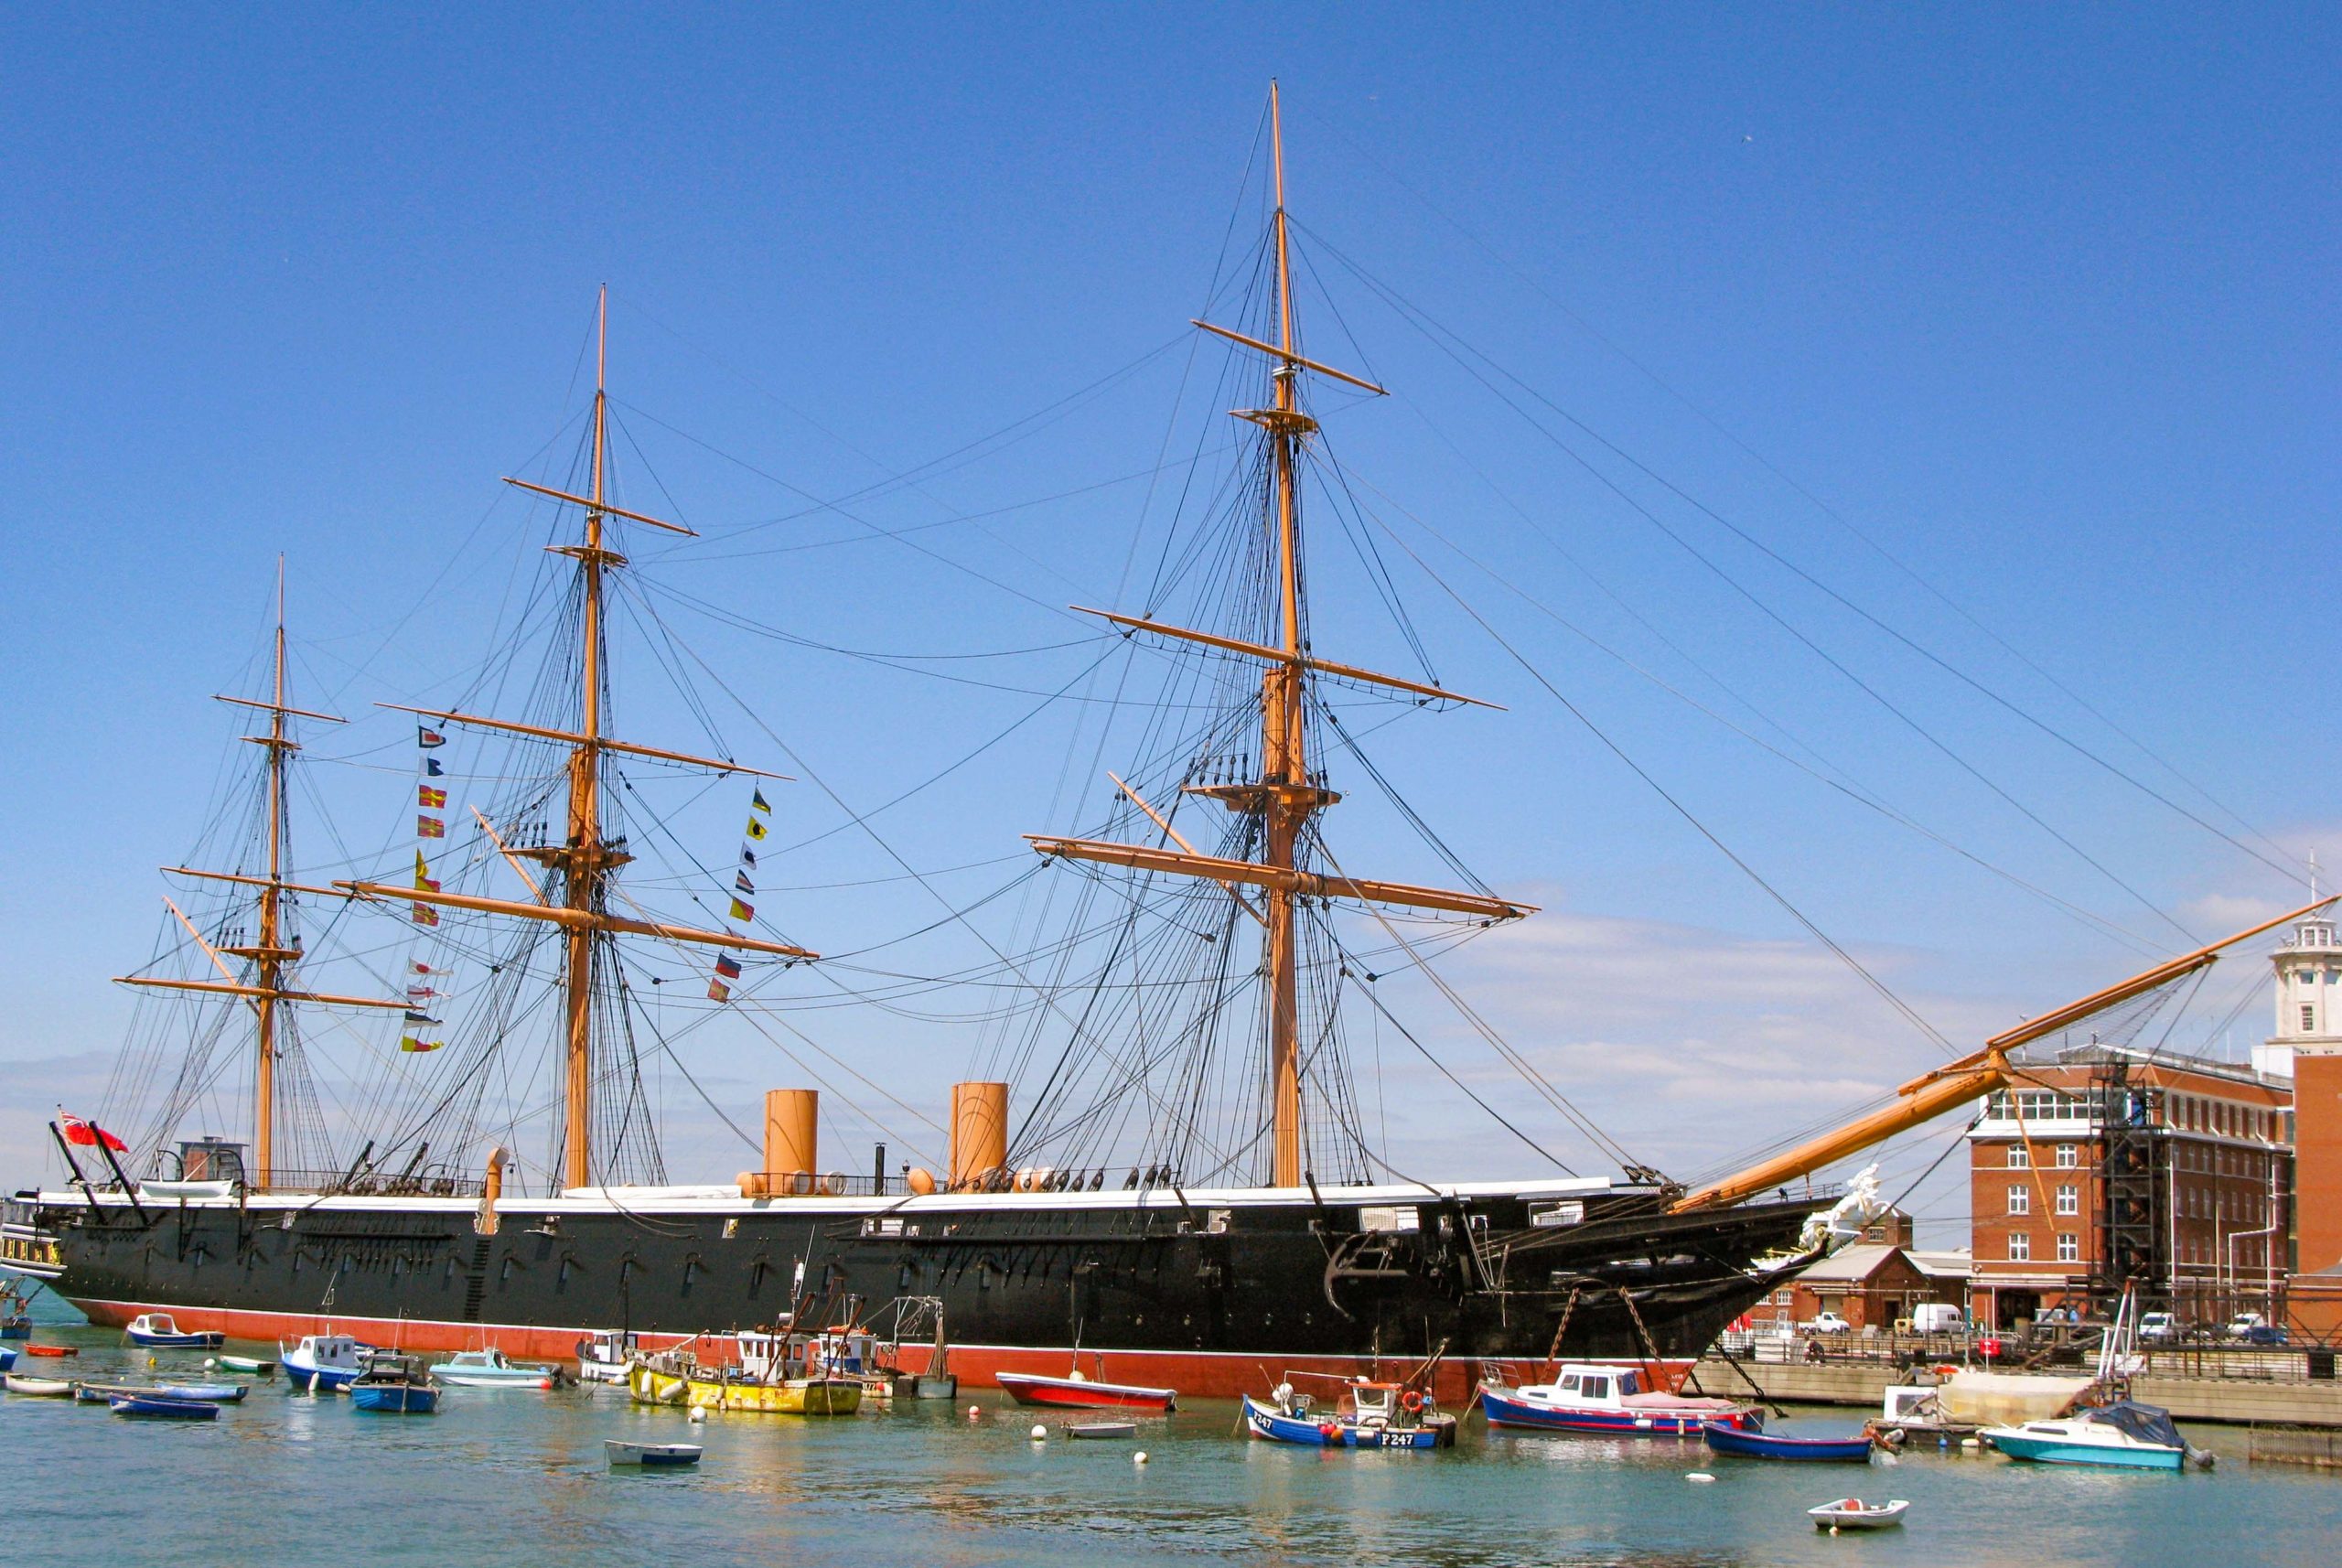 HMS Warrior © geni - licence [CC BY-SA 4.0] from Wikimedia Commons